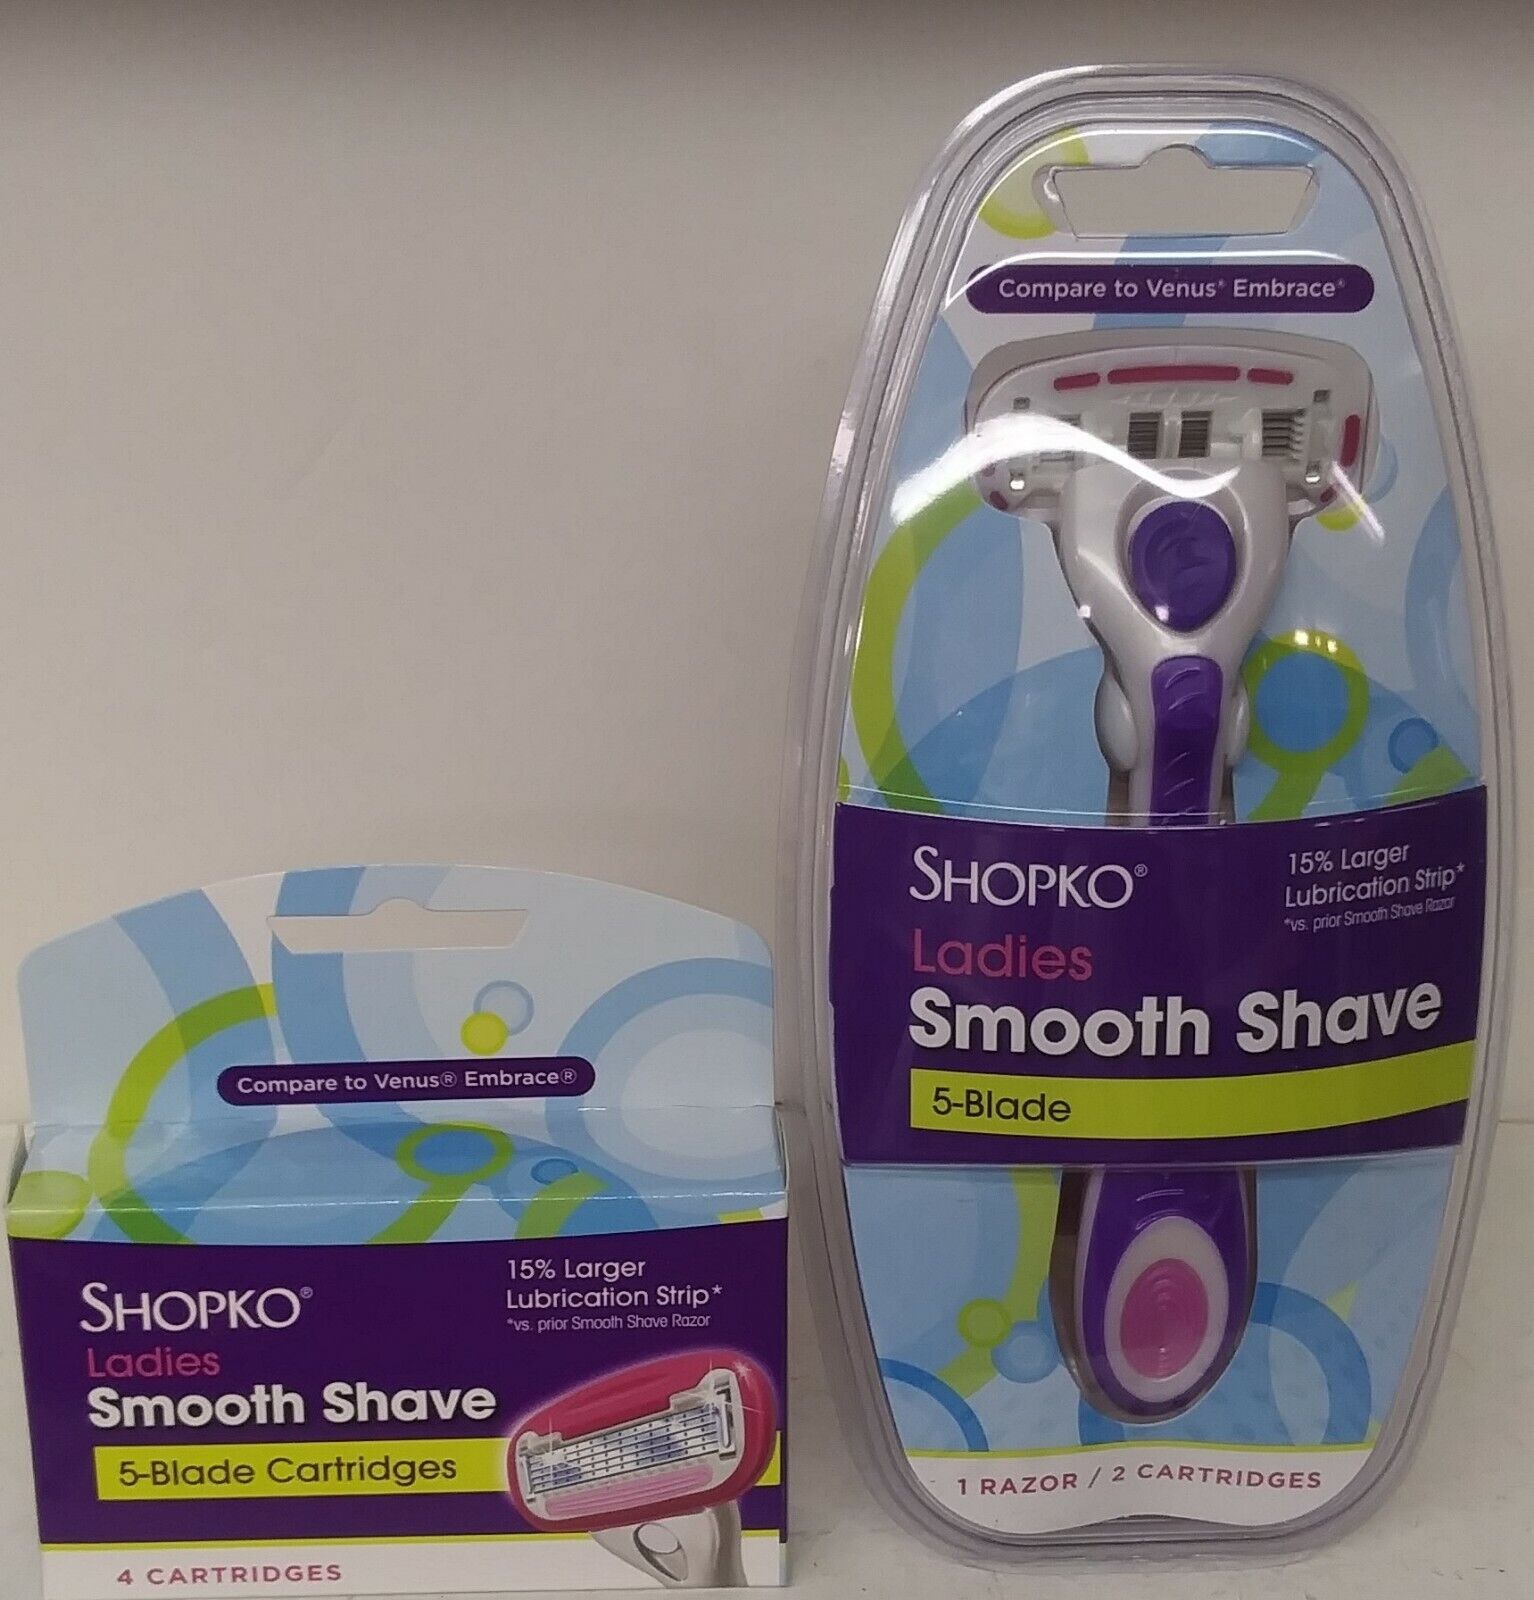 SHOPKO CARE LADIES SMOOTH SHAVE 5-BLADE  1 Handle w/ 6 razor CARTRIDGES  SHOPKO CARE Does Not Apply